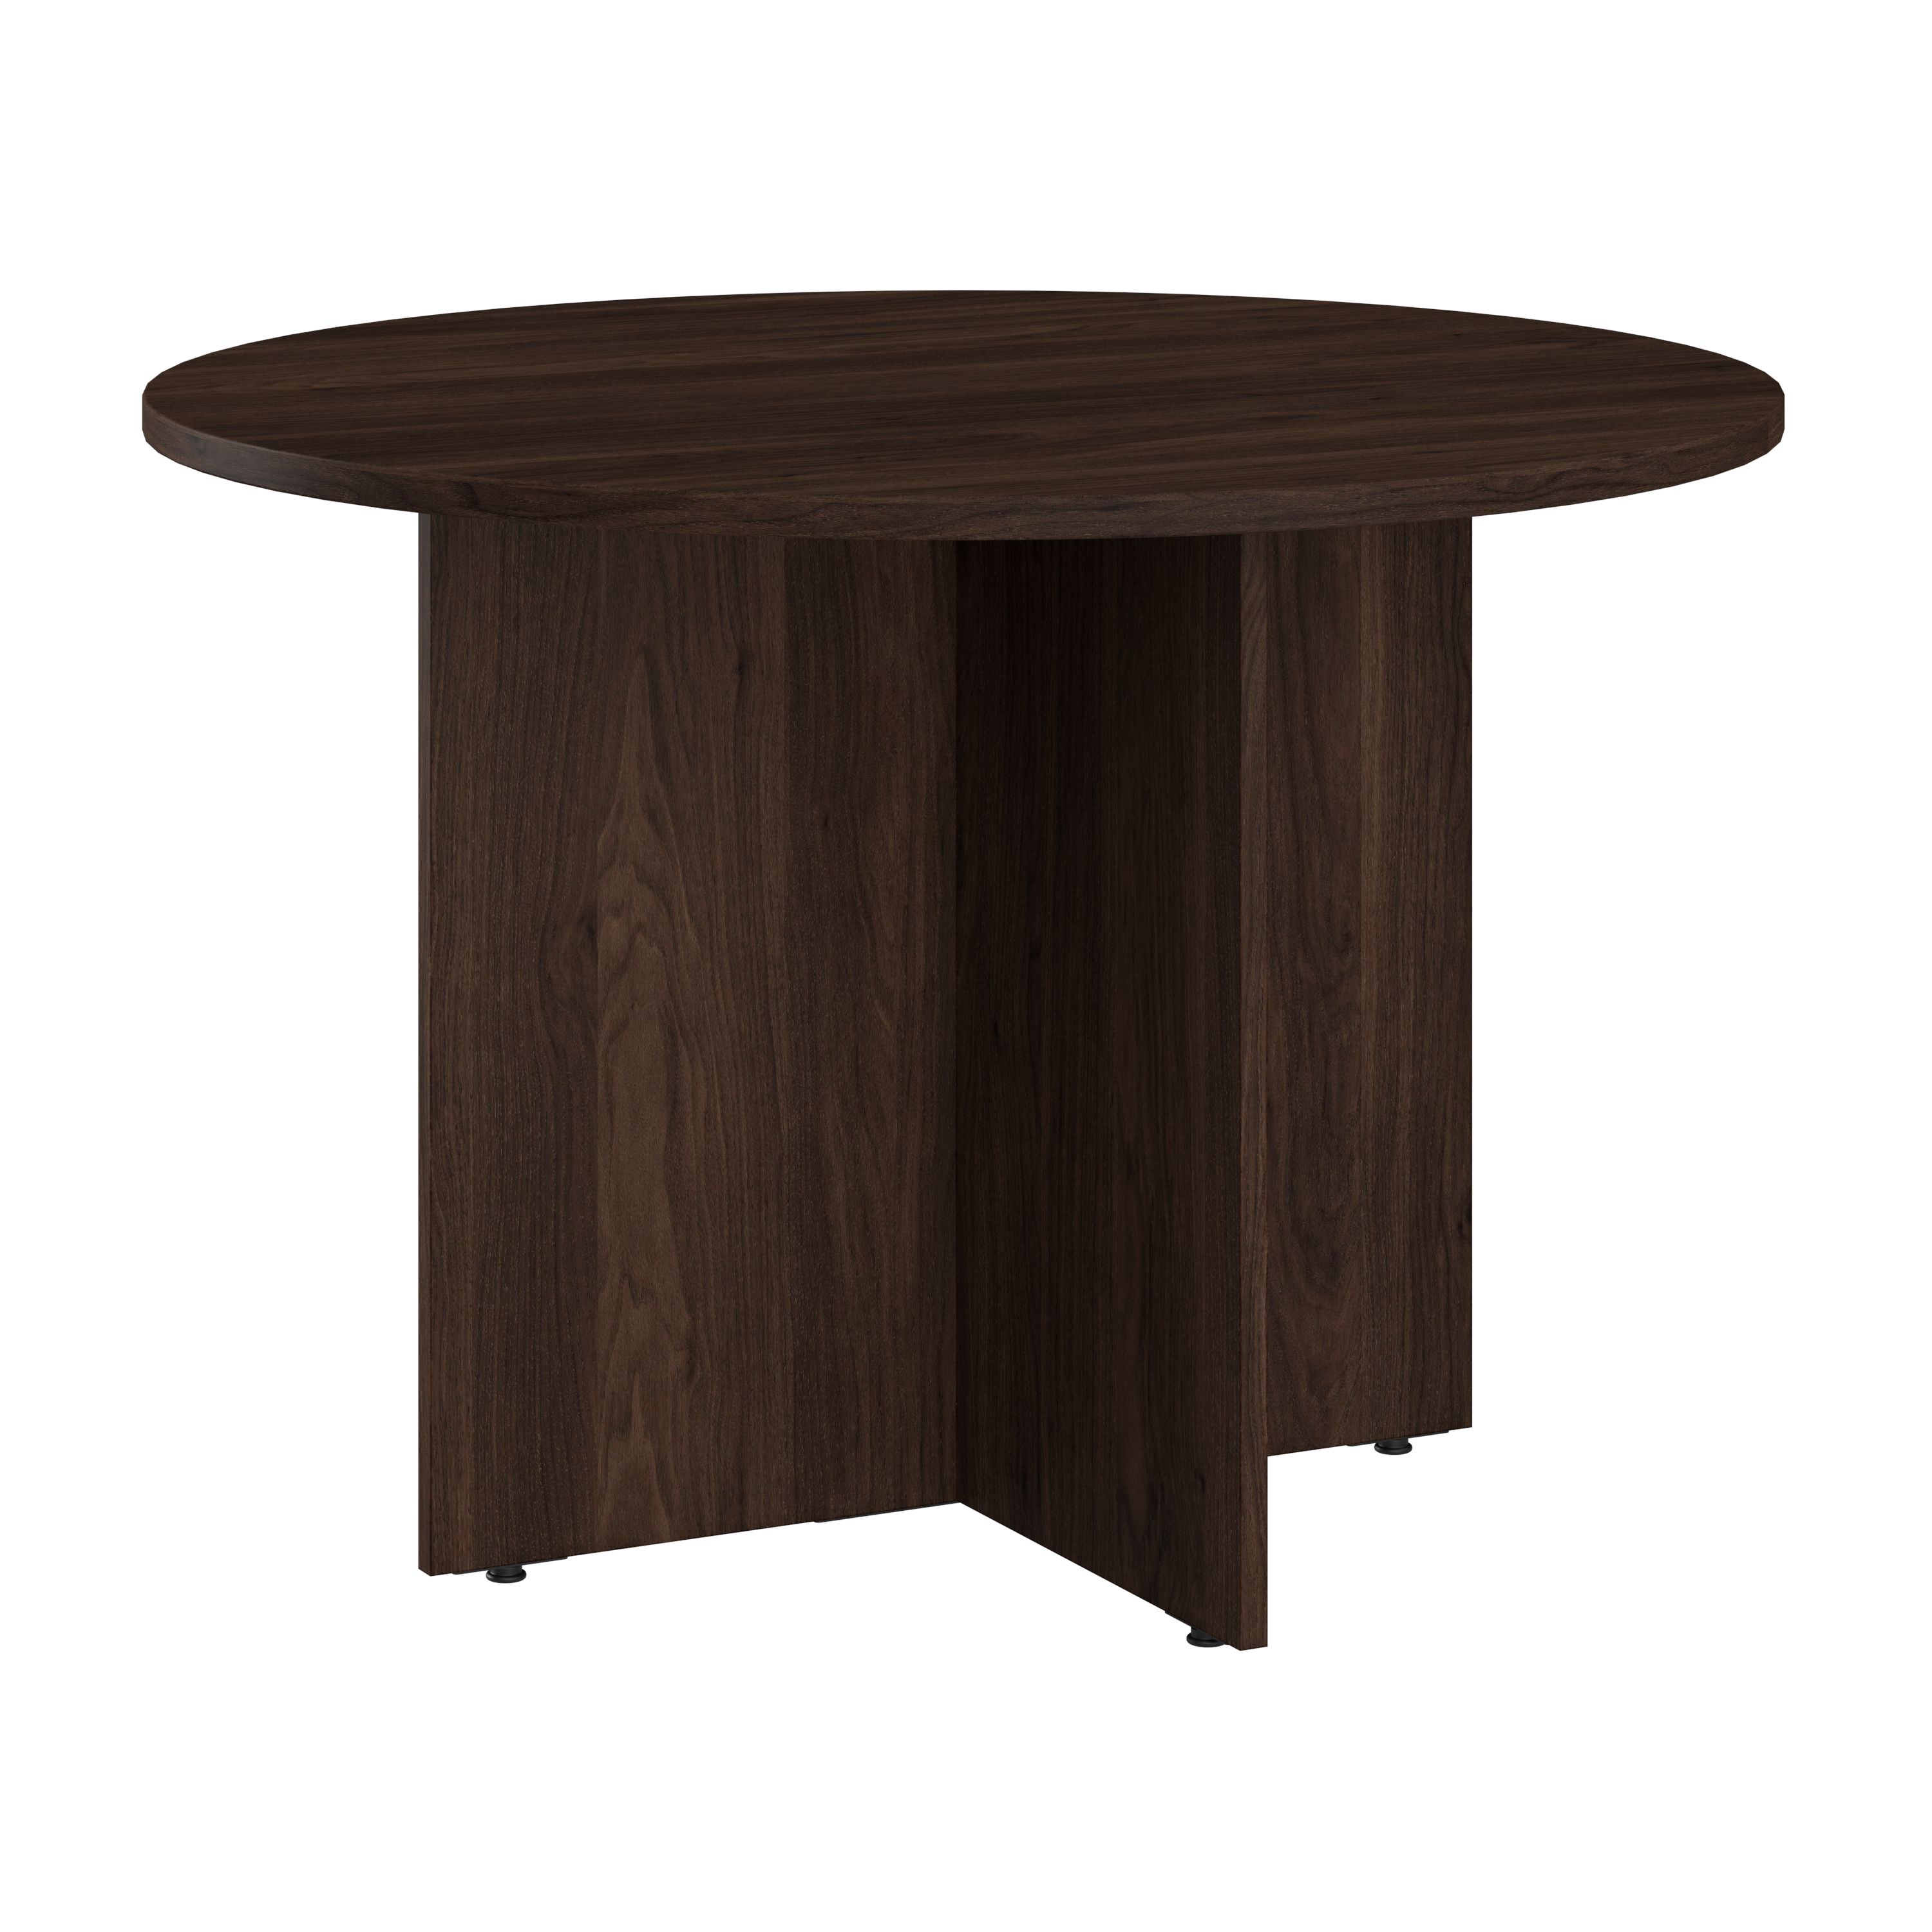 Shop Bush Business Furniture 42W Round Conference Table with Wood Base 02 99TB42RBW #color_black walnut